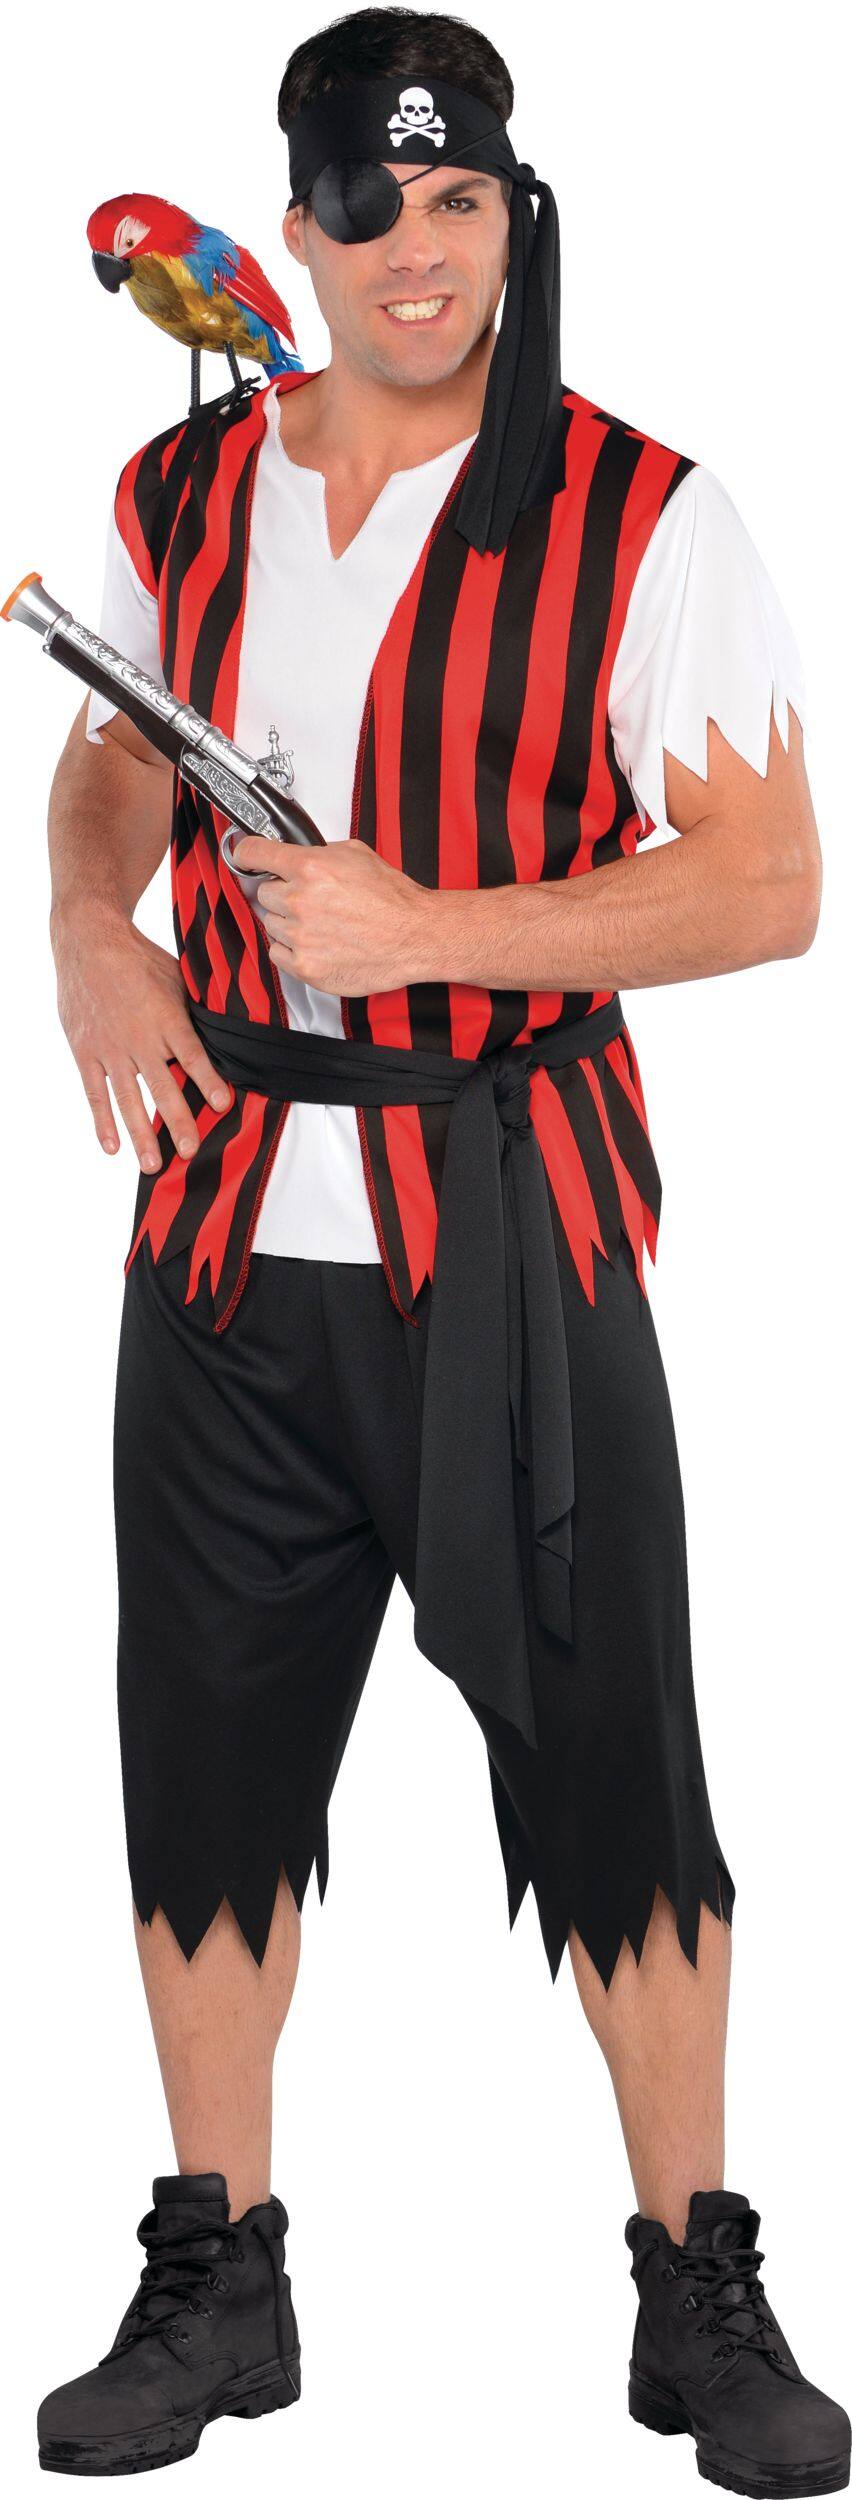 Mens Ahoy Matey Pirate Blackred Striped Outfit With Shirtpantsbandana Halloween Costume One 2236